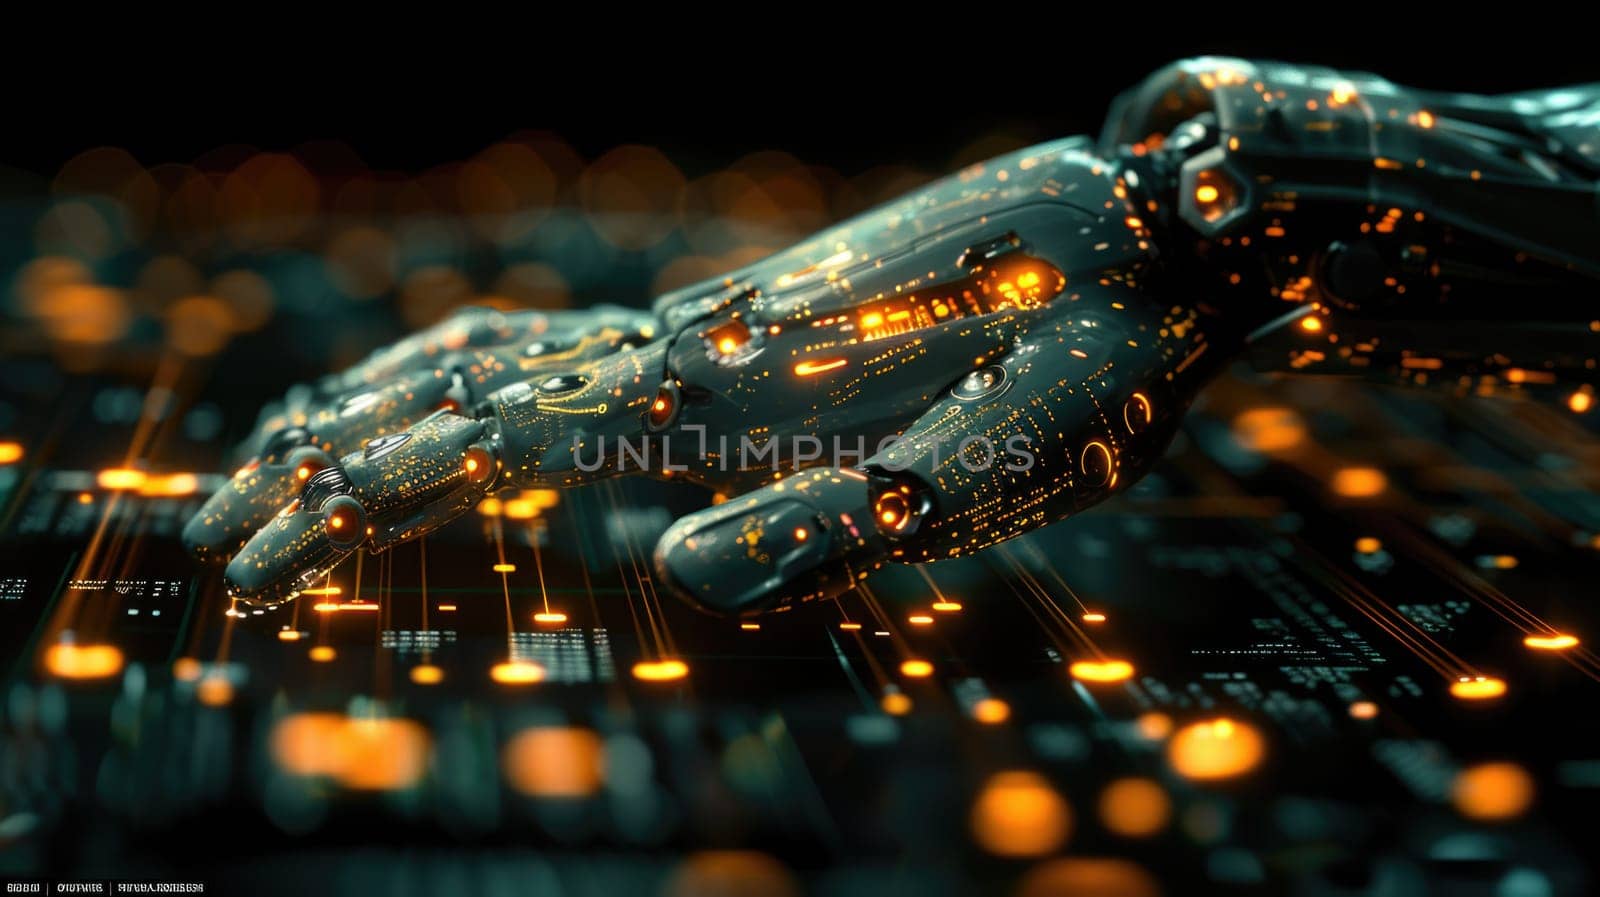 Advanced Robotic Hand With Glowing Lights by but_photo